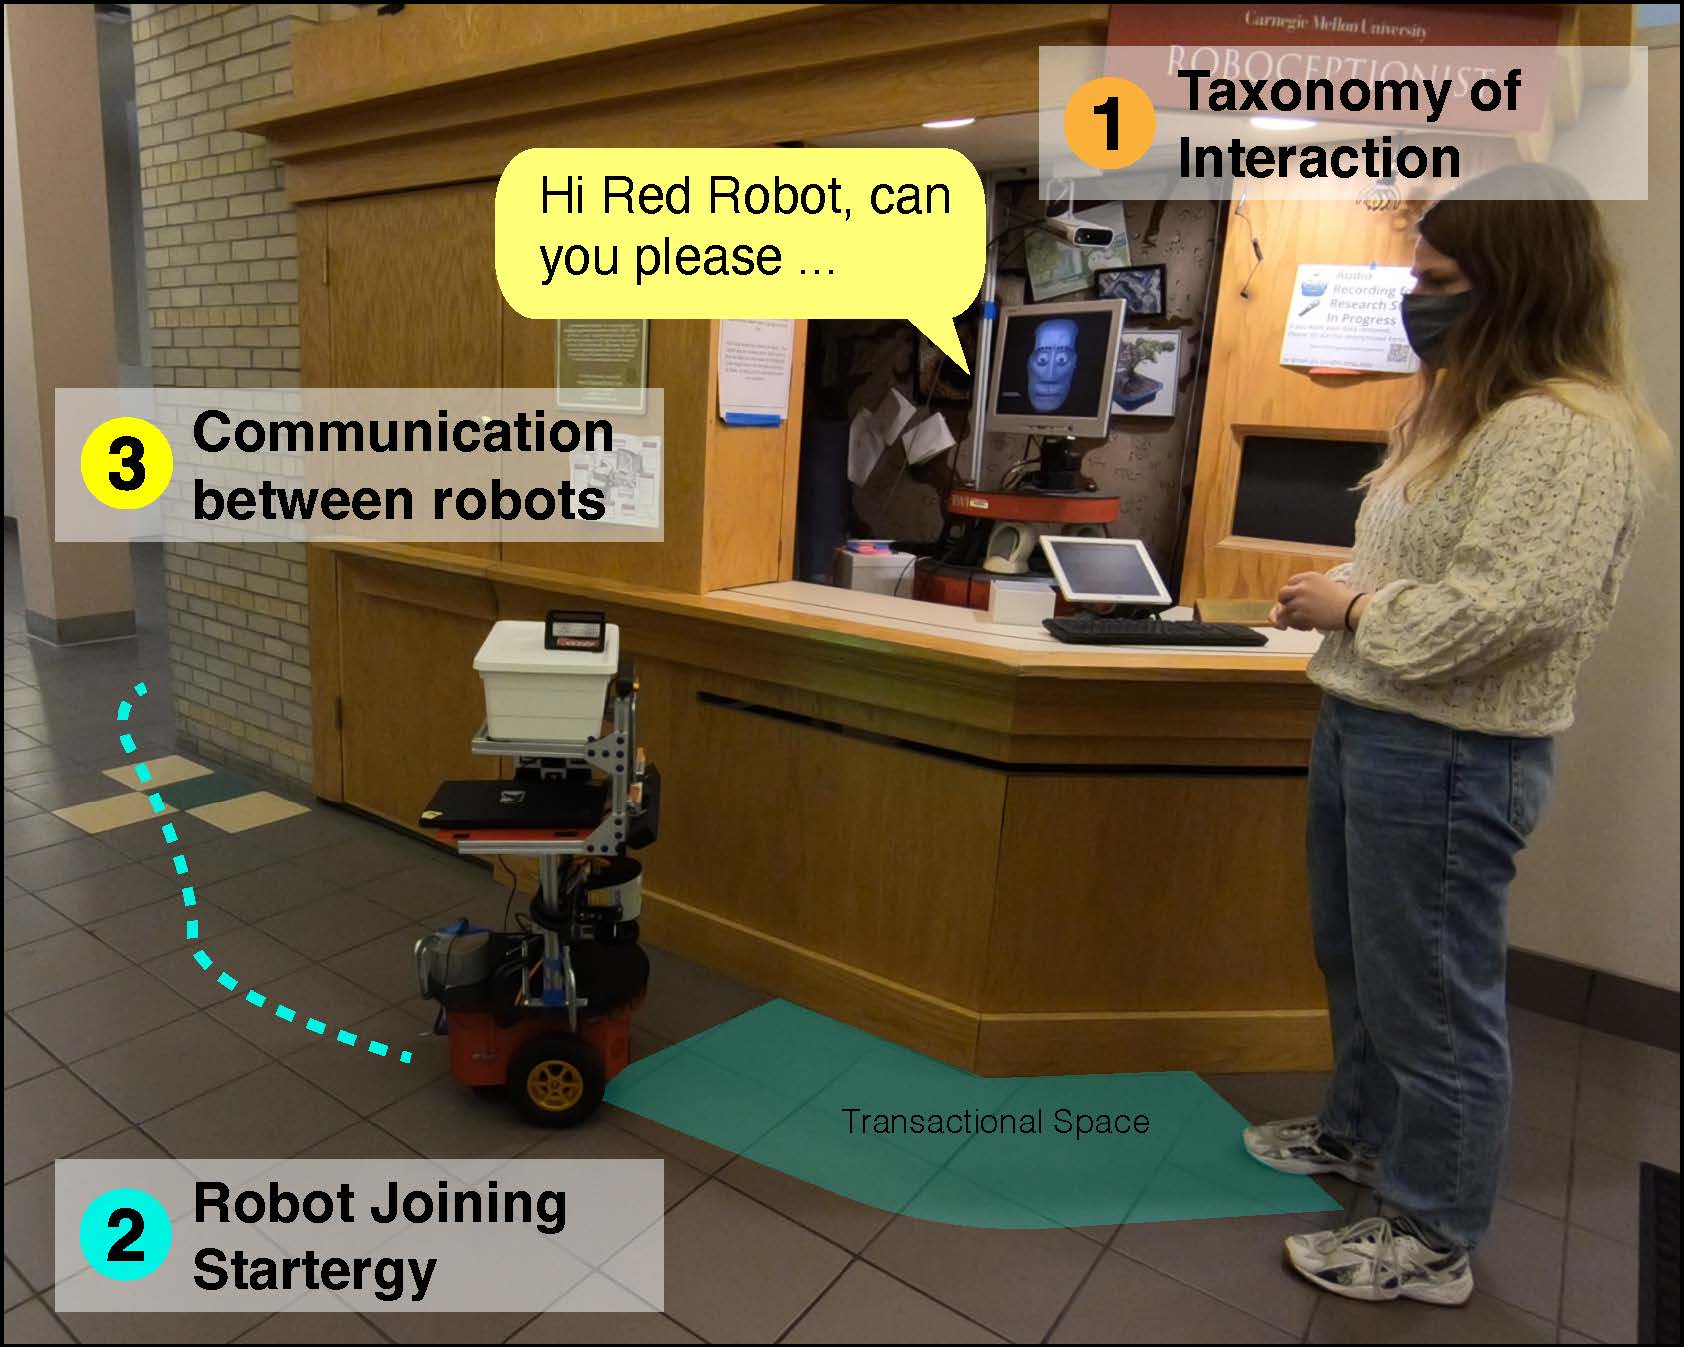 an example of person transfer. It also show the research's contribution: (1) Taxanomy of Interaction, (2) Robot Joining Stratergy, and (3) Communication between robots